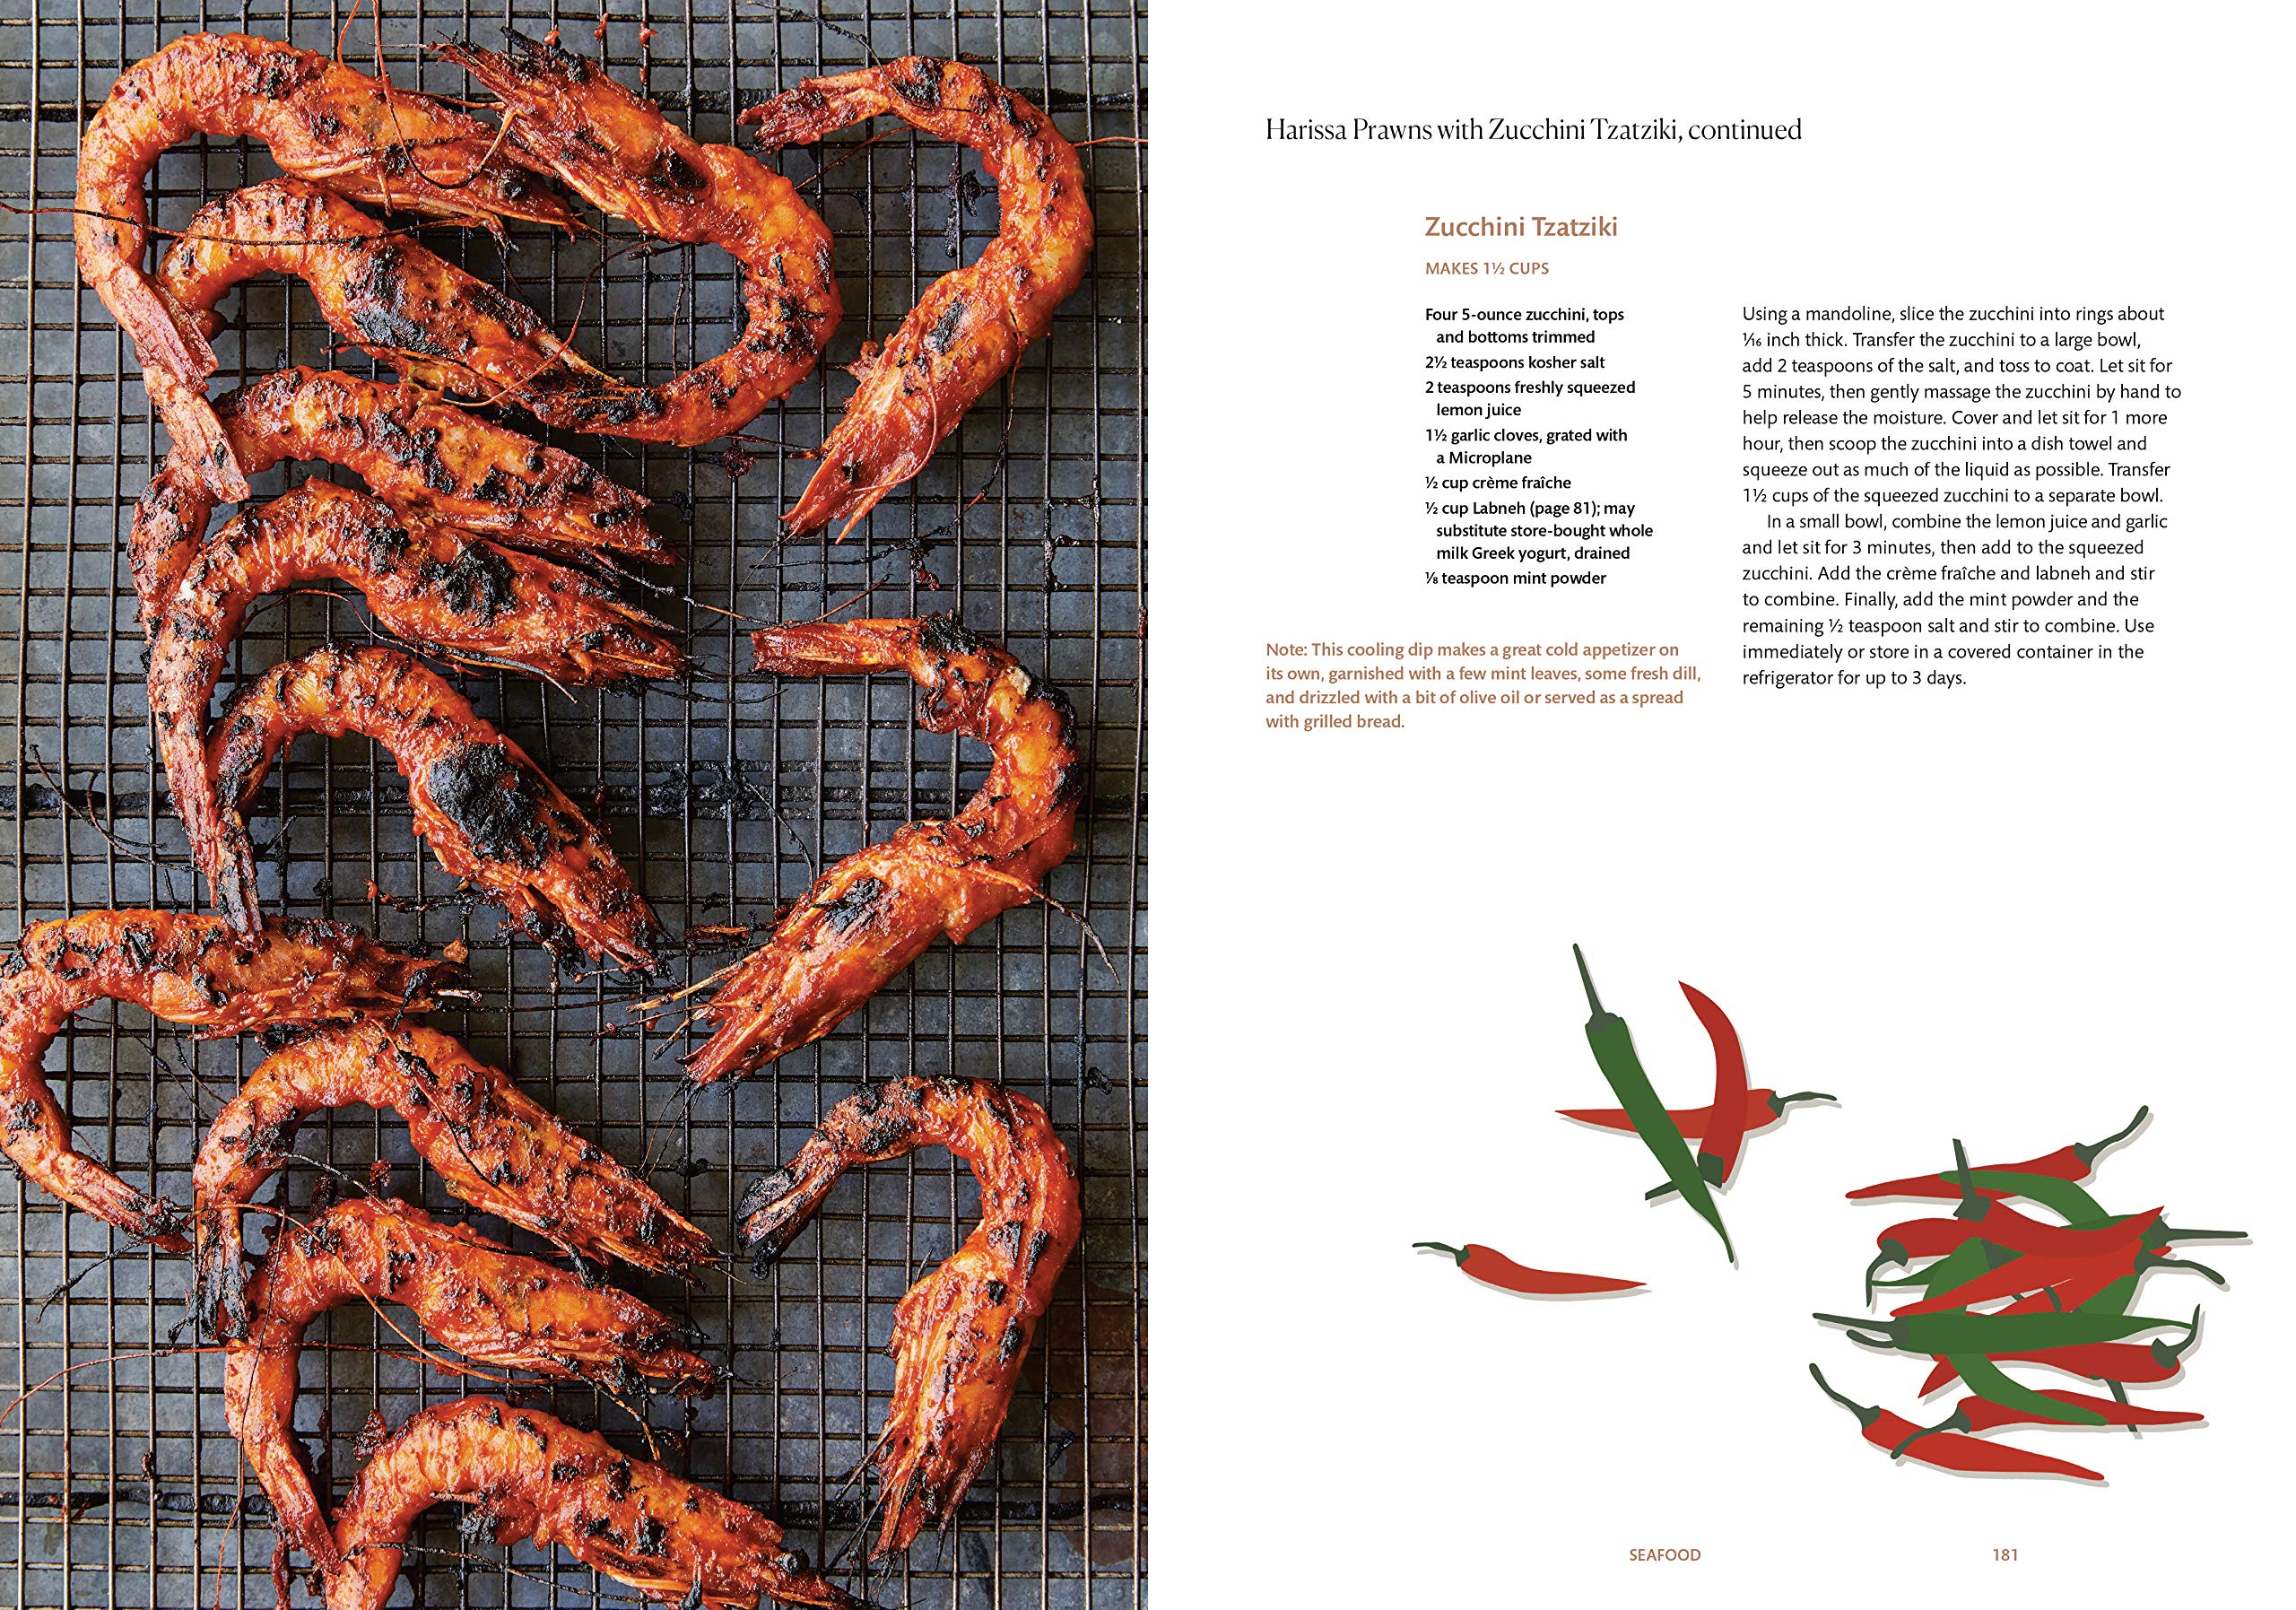 Bavel: Modern Recipes Inspired by the Middle East (Ori Menashe, Genevieve Gergis)